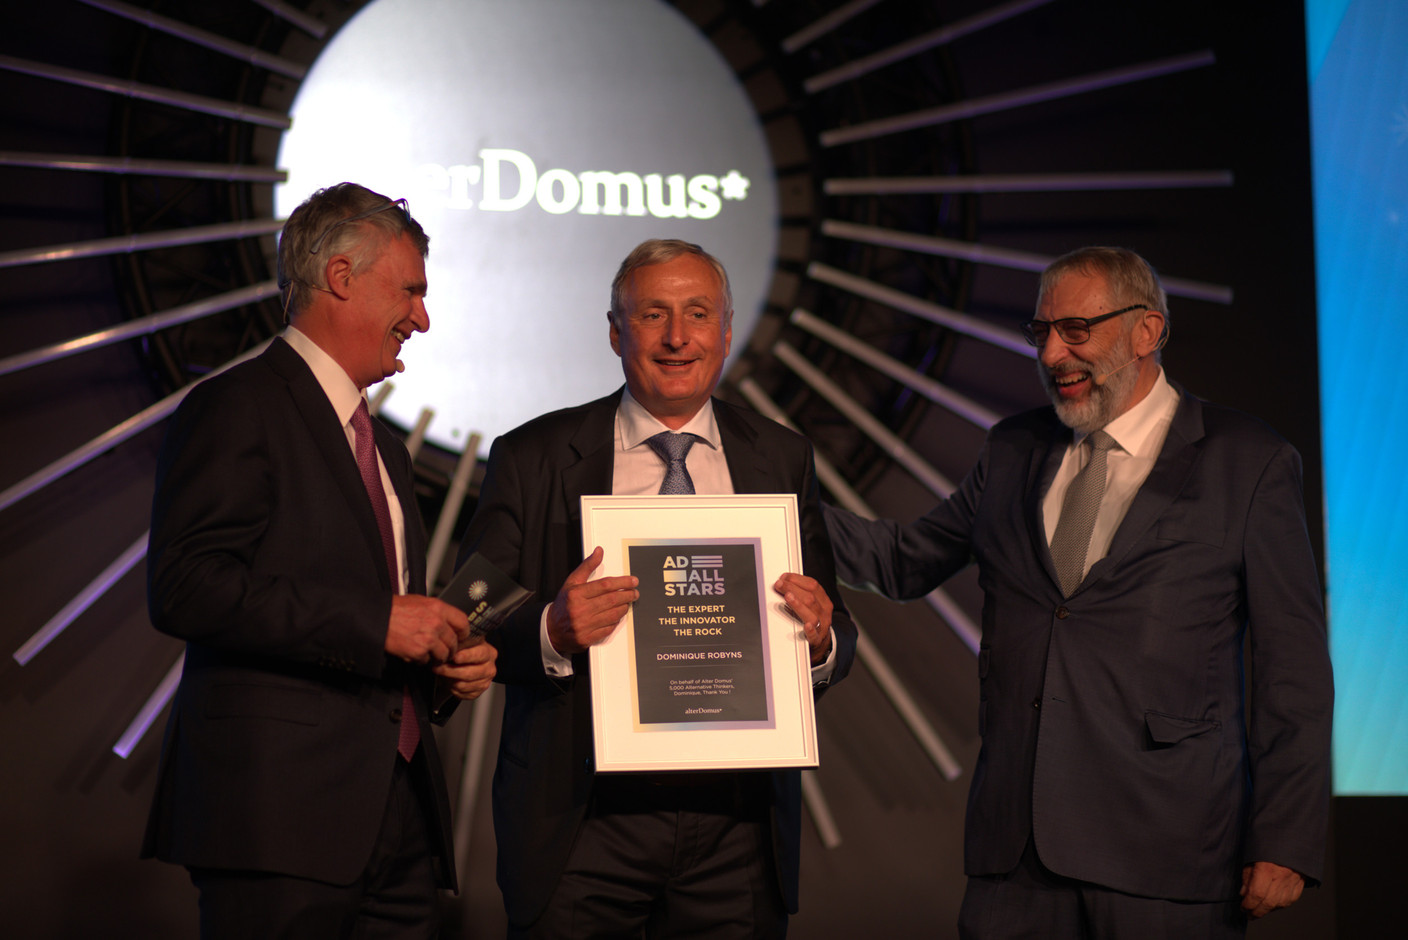 Dominique Robyns (centre), Alter Domus founder, receiving an award of honour from René Beltjens and Gérard Becquer, members of Alter Domus’ supervisory board. Photo: Alter Domus